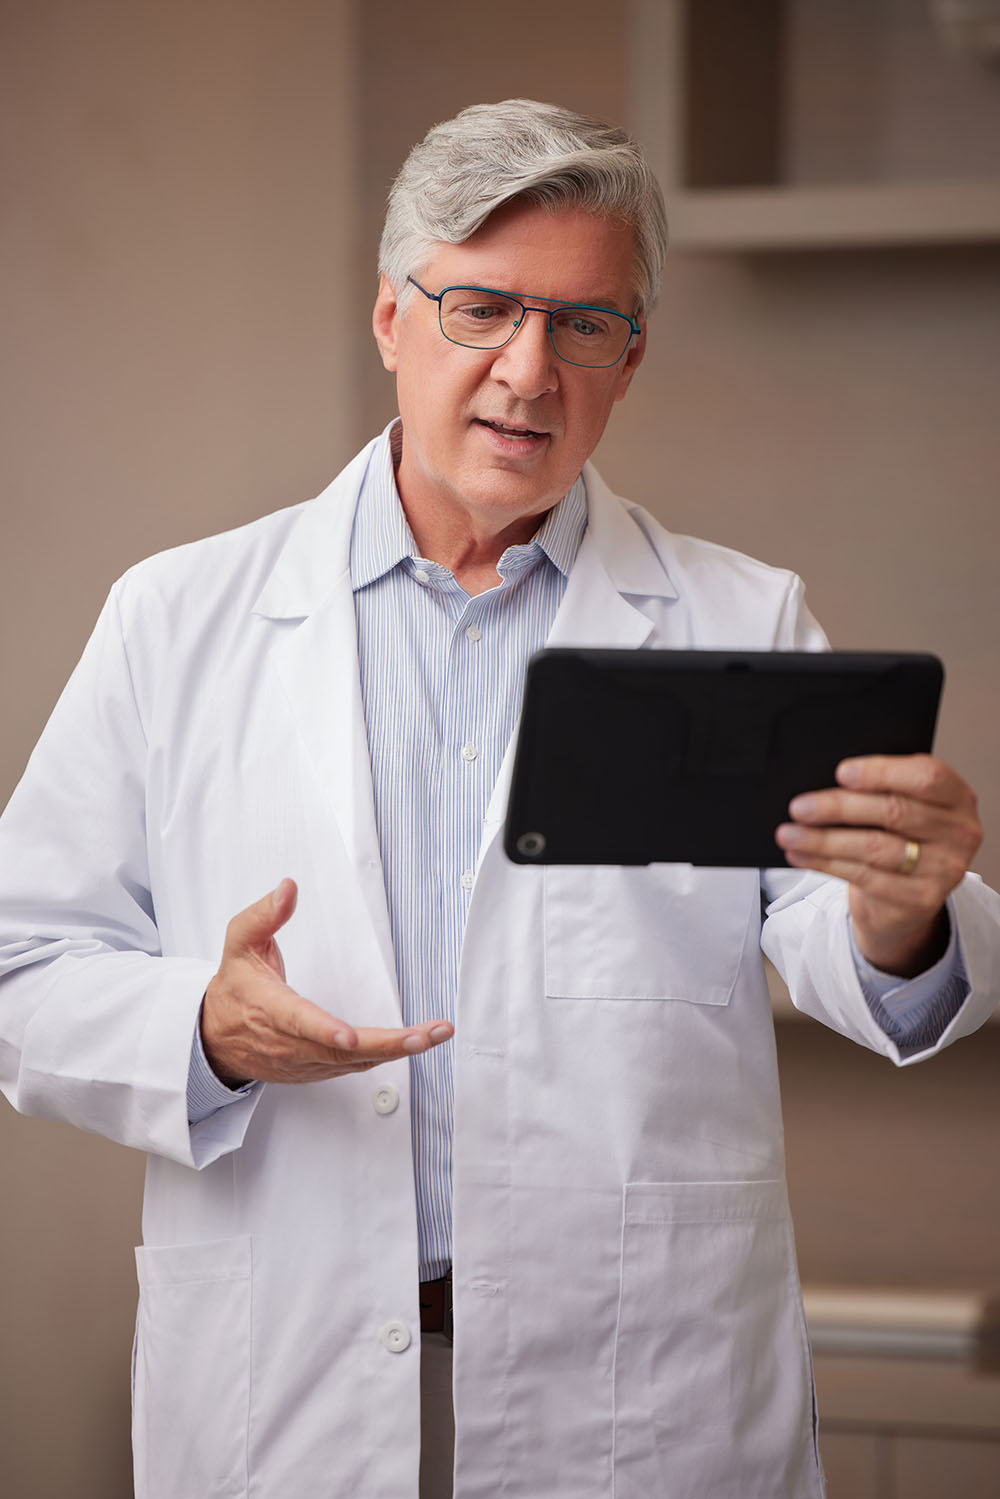 Telehealth White Male Doctor with Glasses Standing Up Talking on Tablet